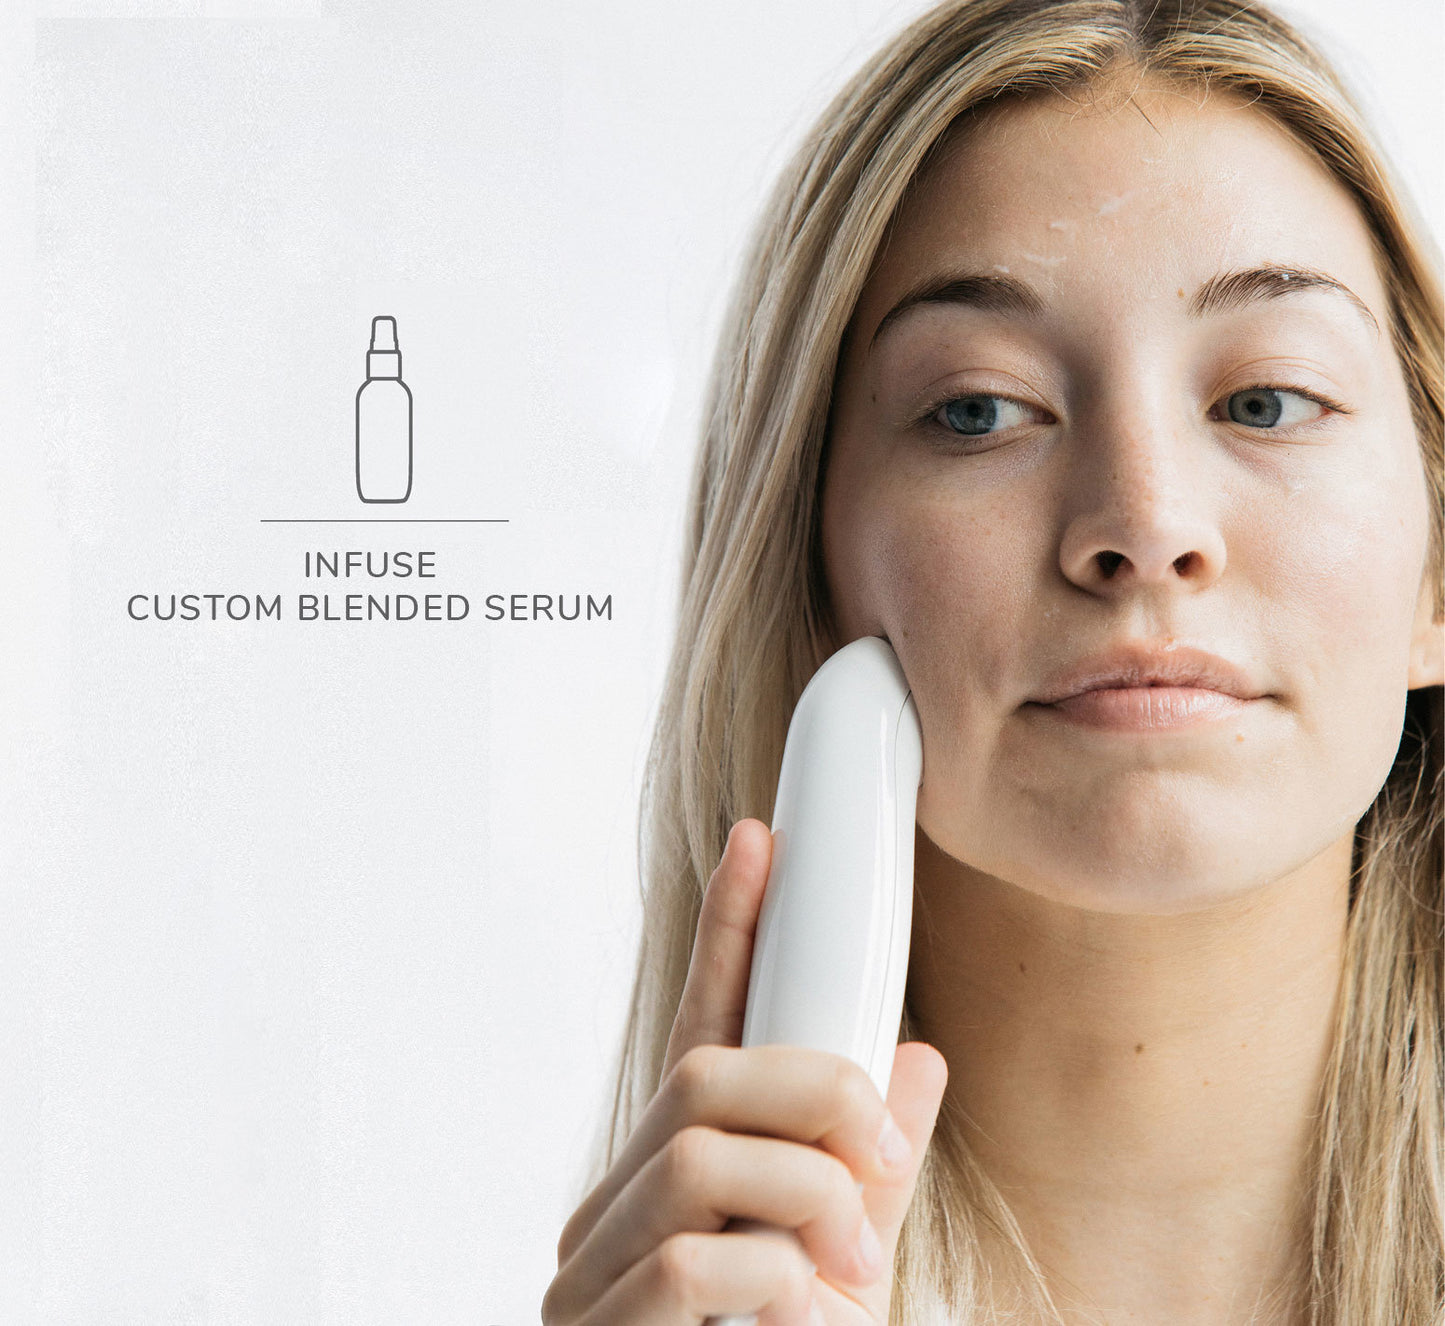 Eno Patented All-In-One Skincare Device. The one device that does it all - exfoliation;  product infusion & facial sculpting